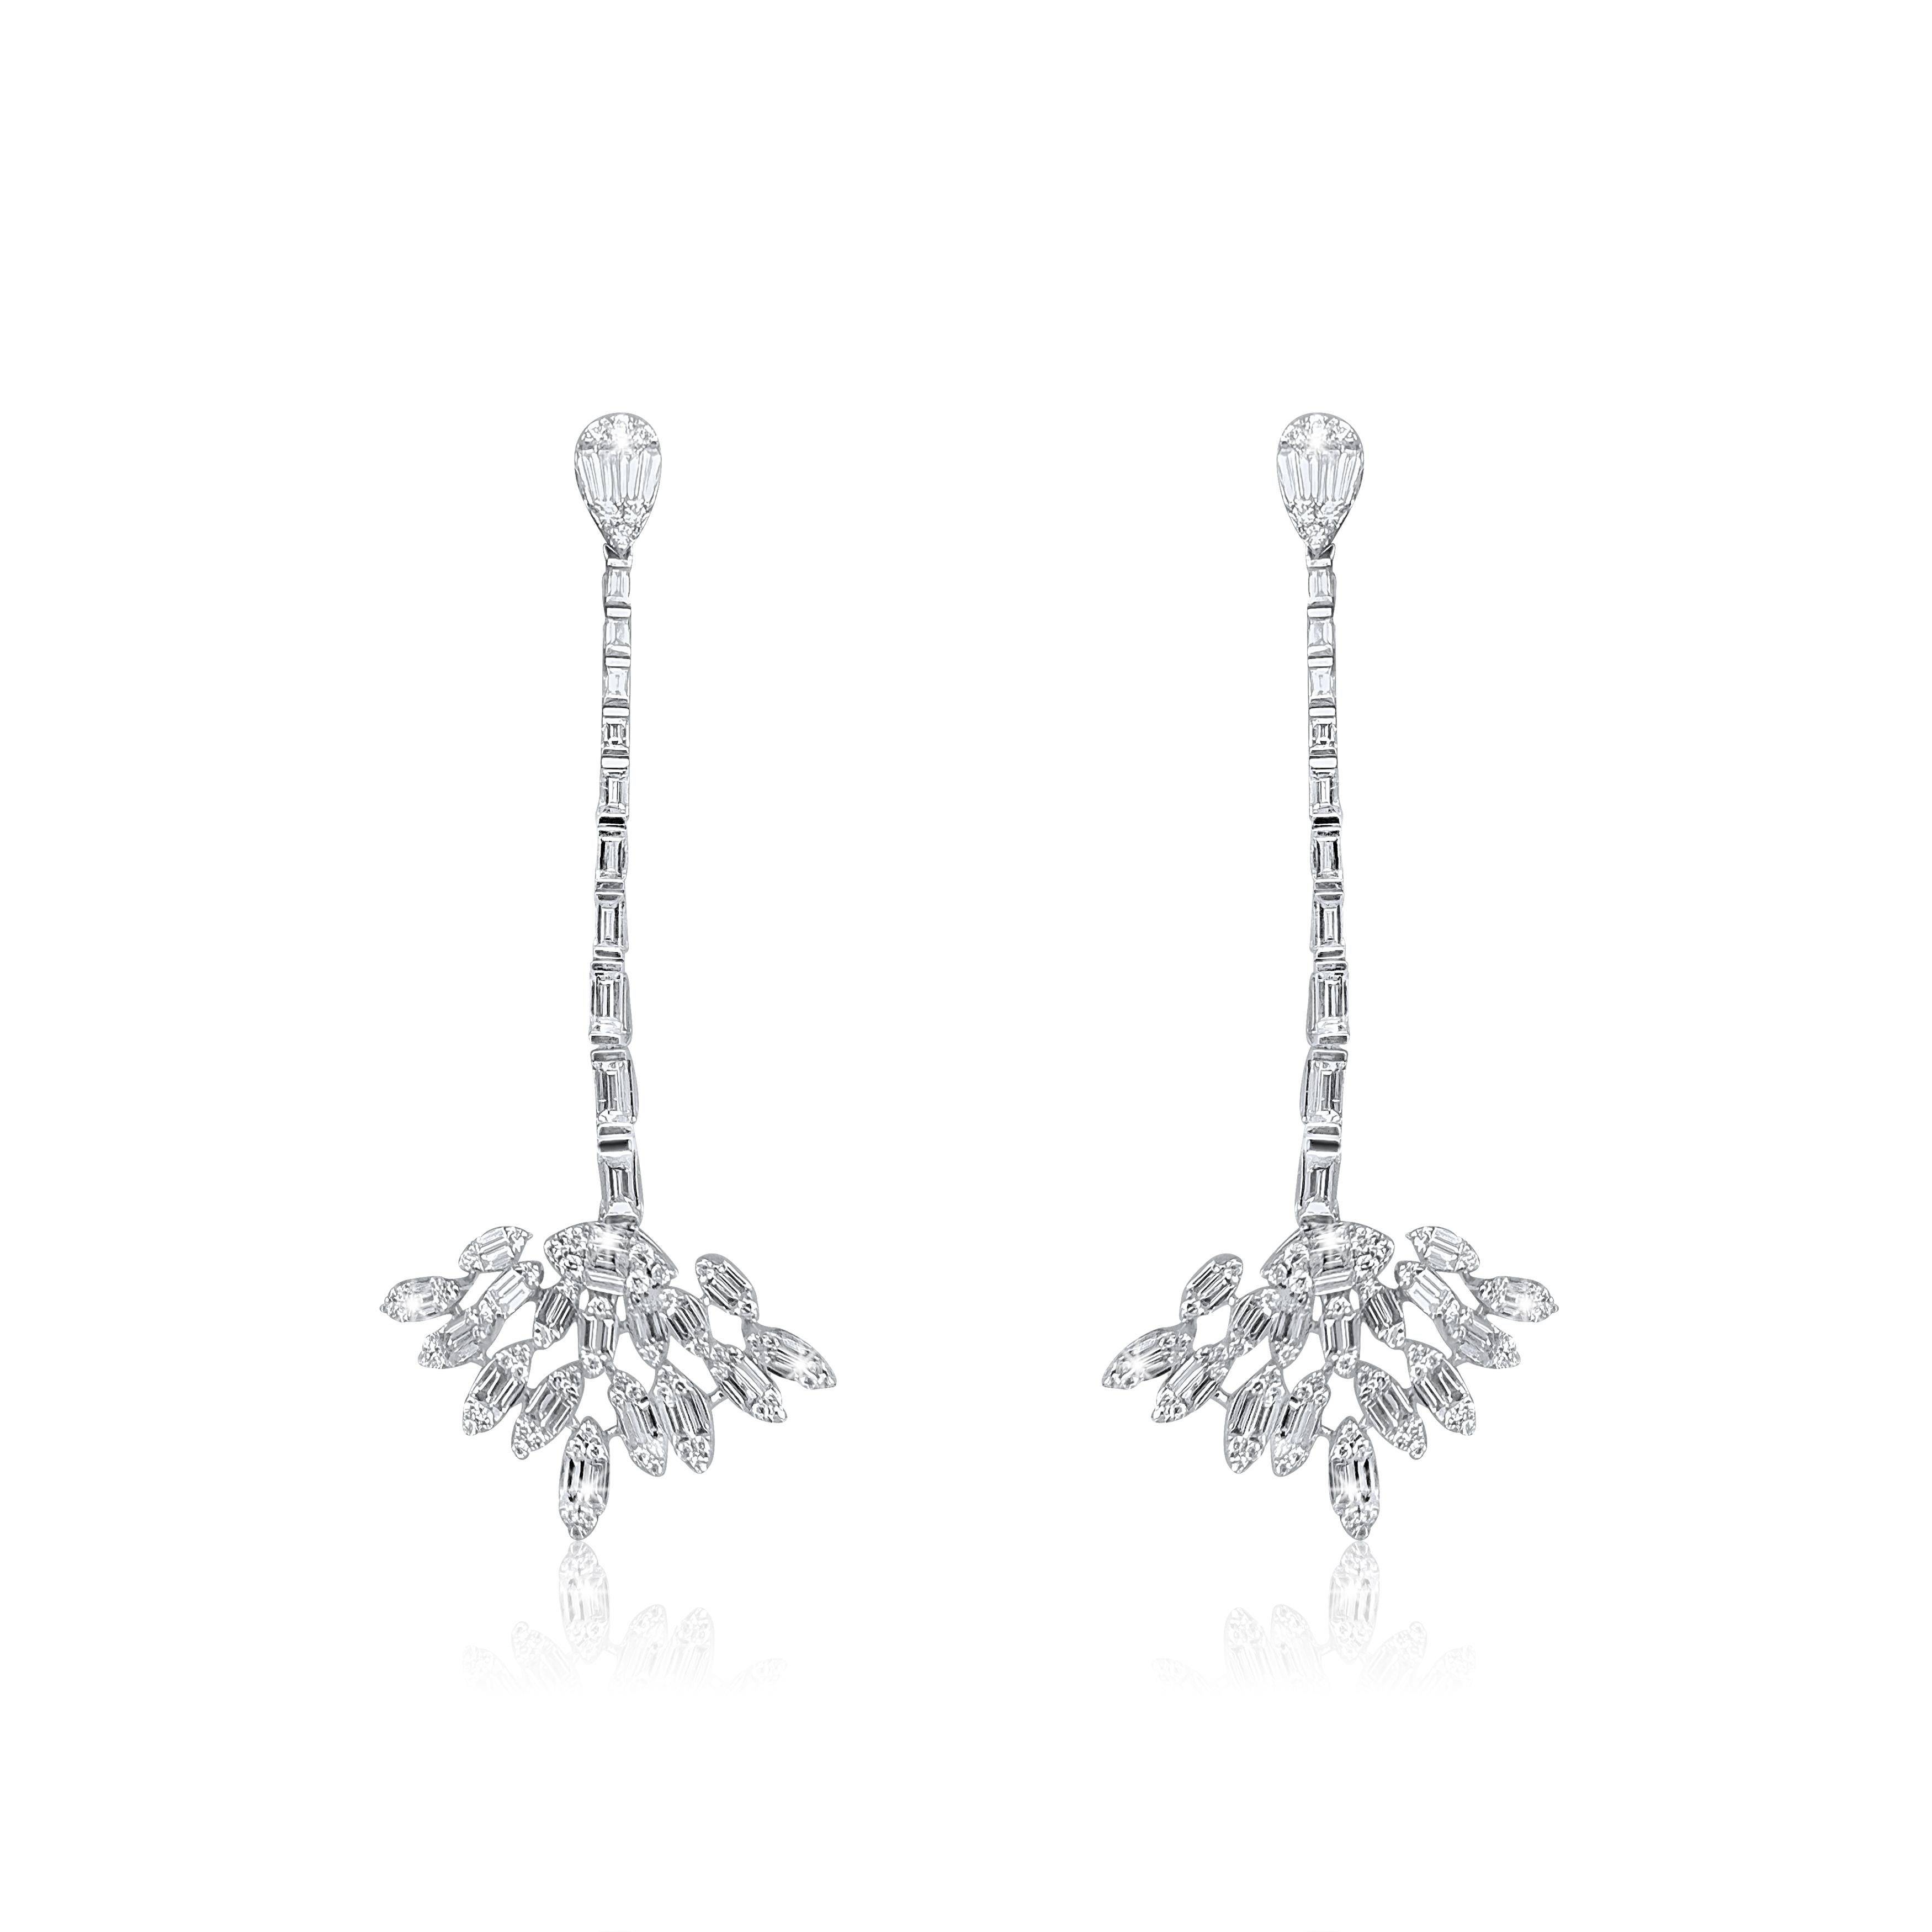 Earring Information

Metal Purity : 18K
Color : White Gold
Gold Weight : 10.91g
Diamond Count : 76 Round Diamonds
Round Diamond Carat Weight : 0.54 ttcw
Baguette Diamonds Count : 80
Baguette Diamonds Carat Weight : 2.48 ttcw
Serial #EA16045
